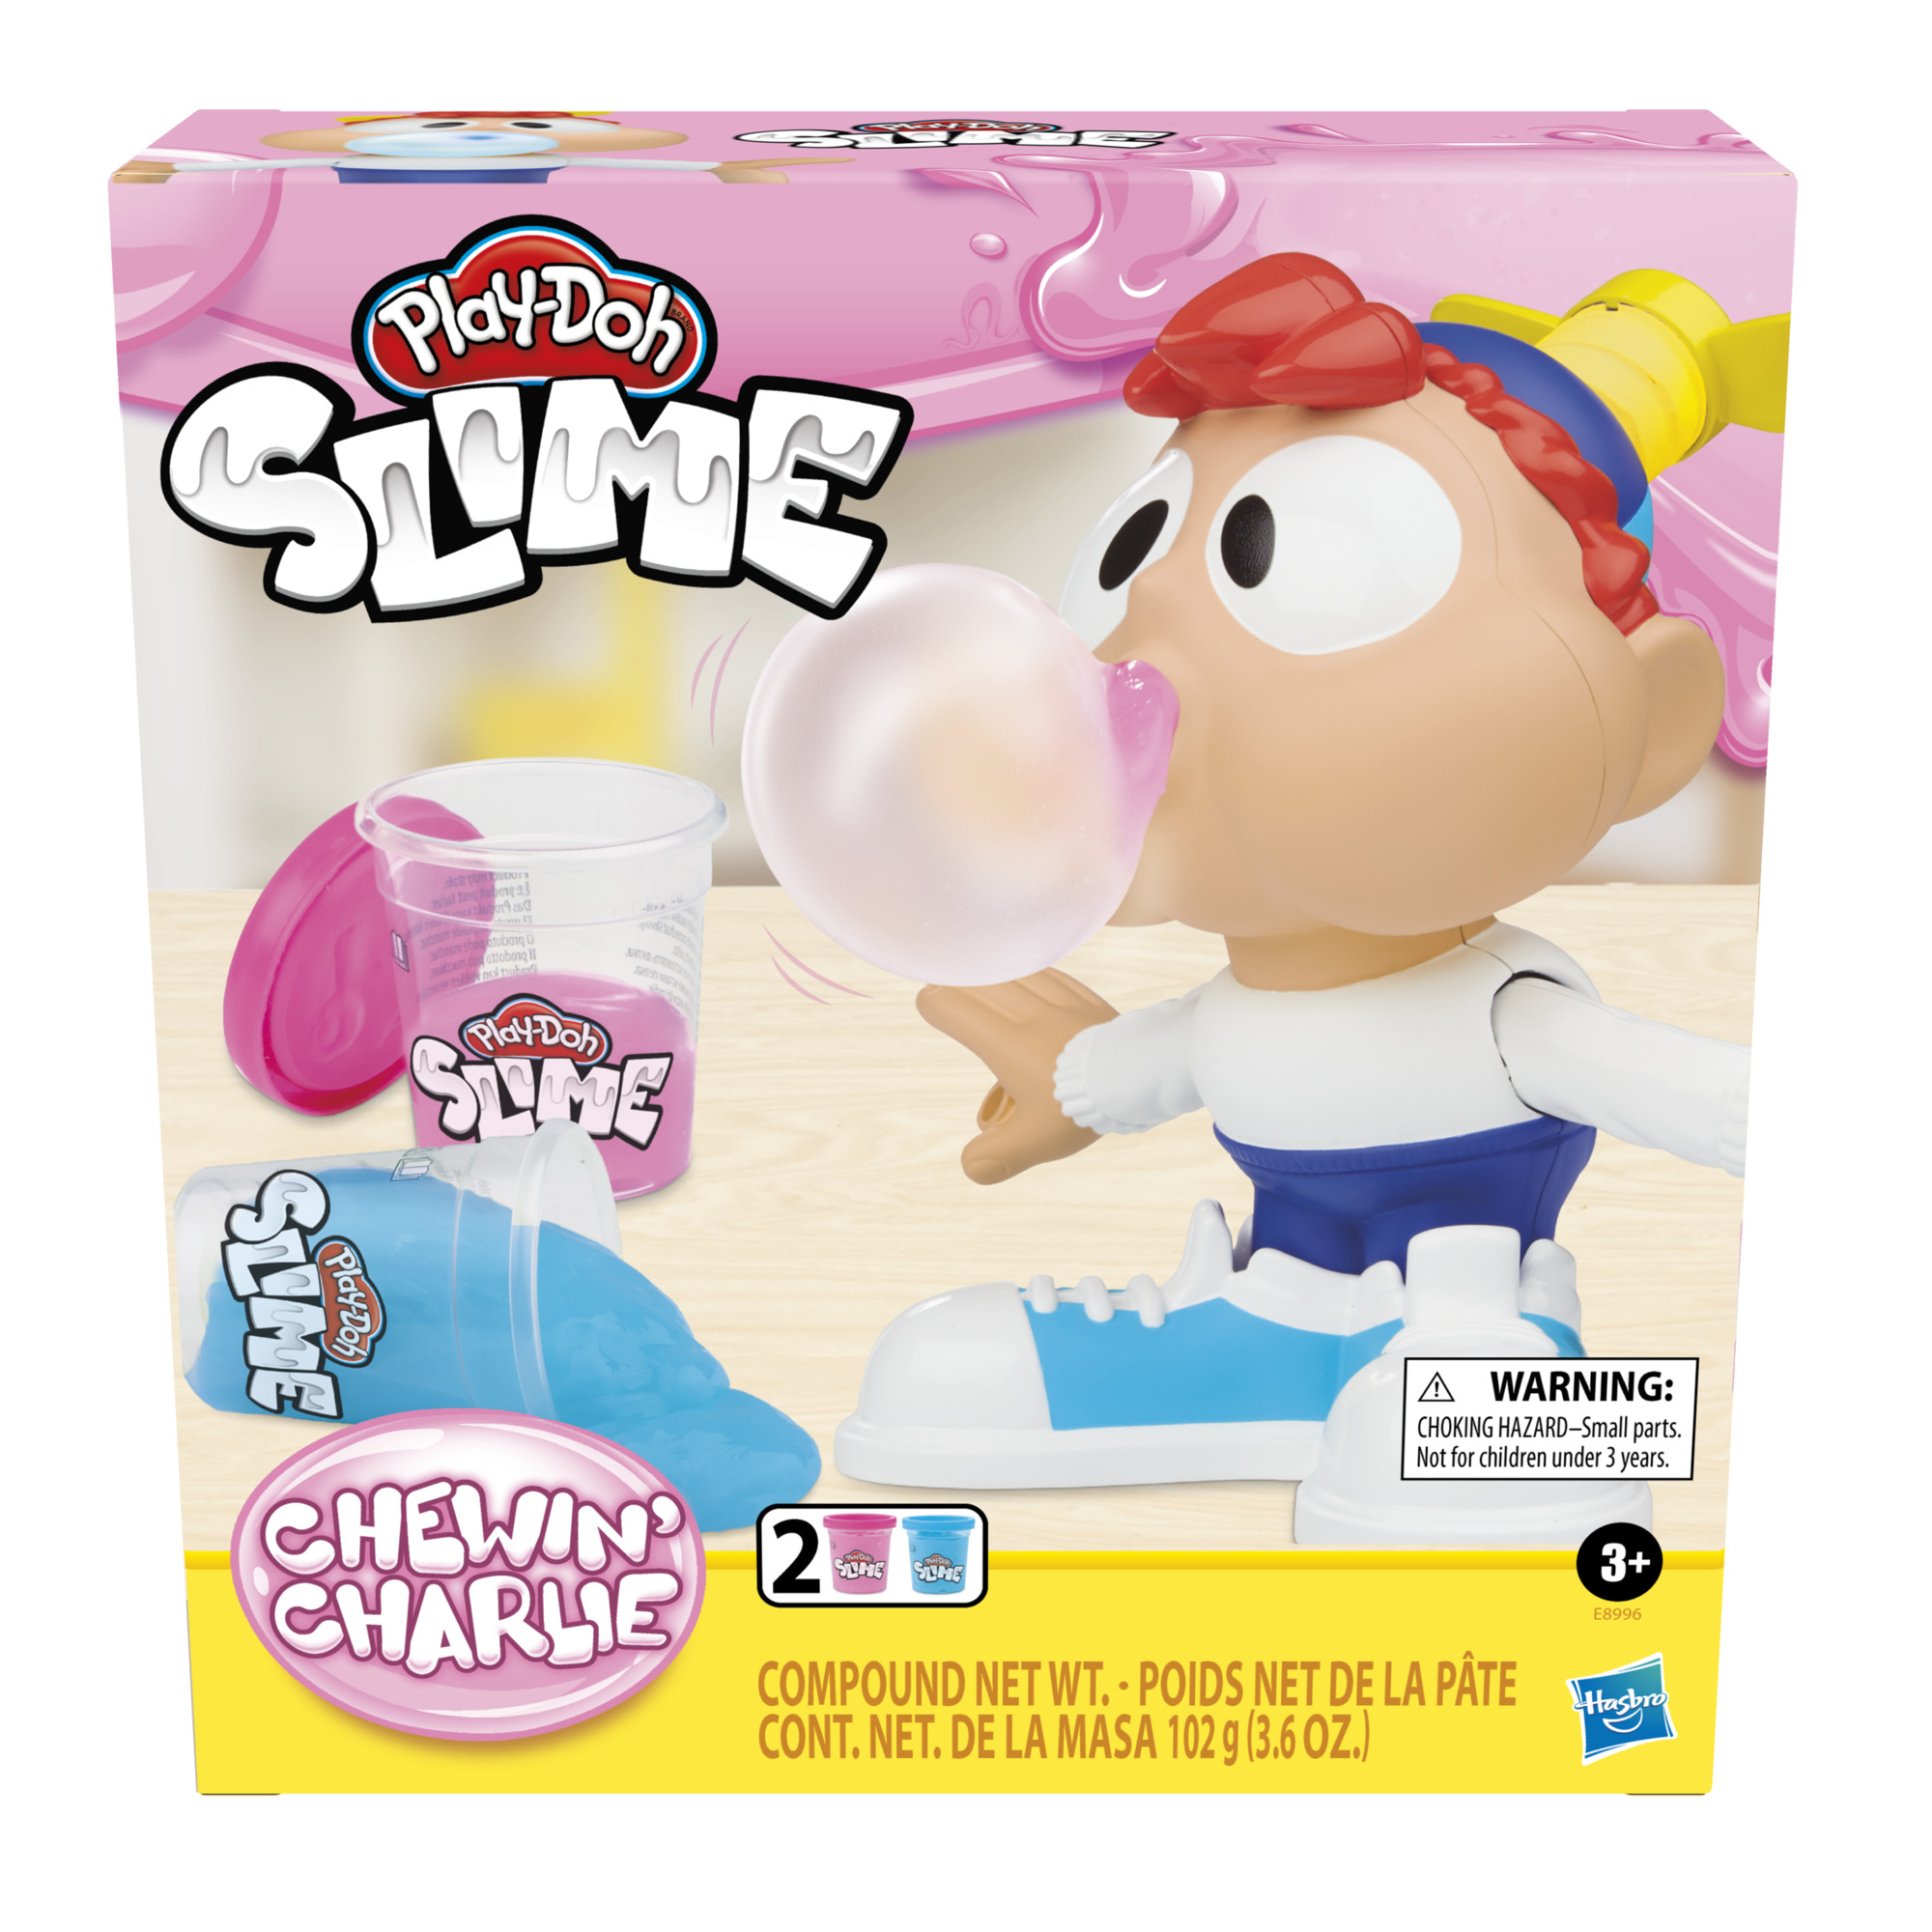 Play-Doh Slime Chewin' Charlie Slime Bubble Maker Toy - image 3 of 6